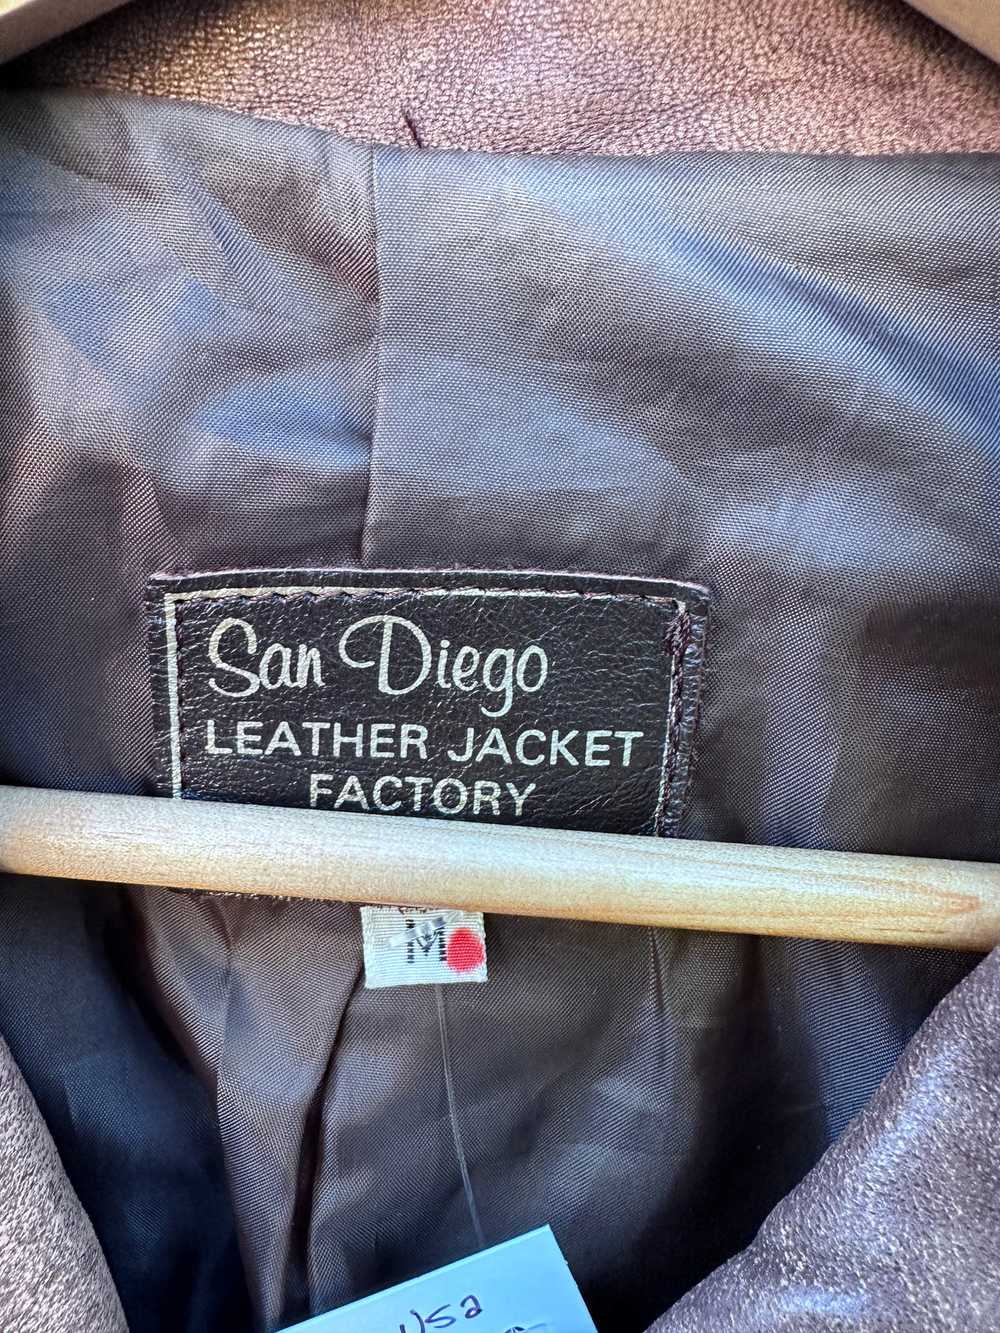 San Diego Leather Jacket Factory - Made in USA - image 4